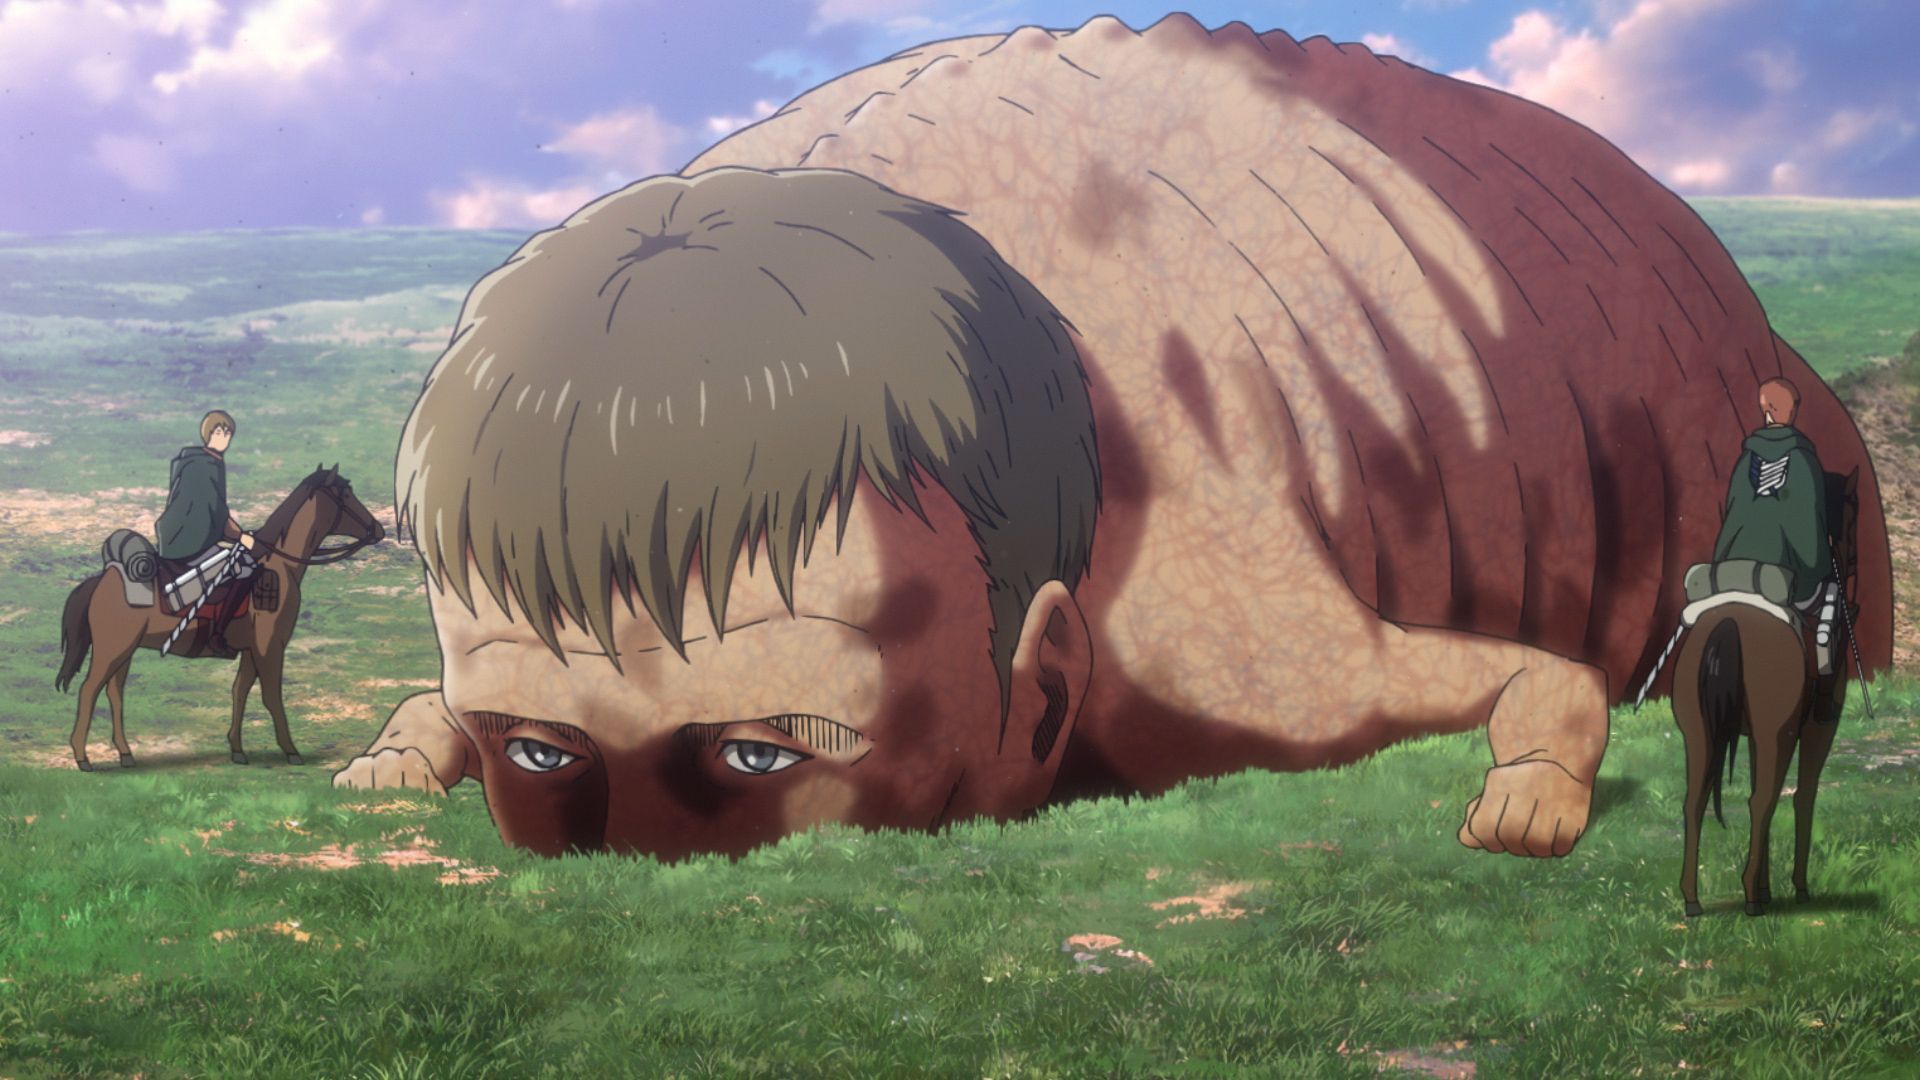 Watch Full Episodes of Attack on Titan, a Part of Toonami on Adult Swim. 